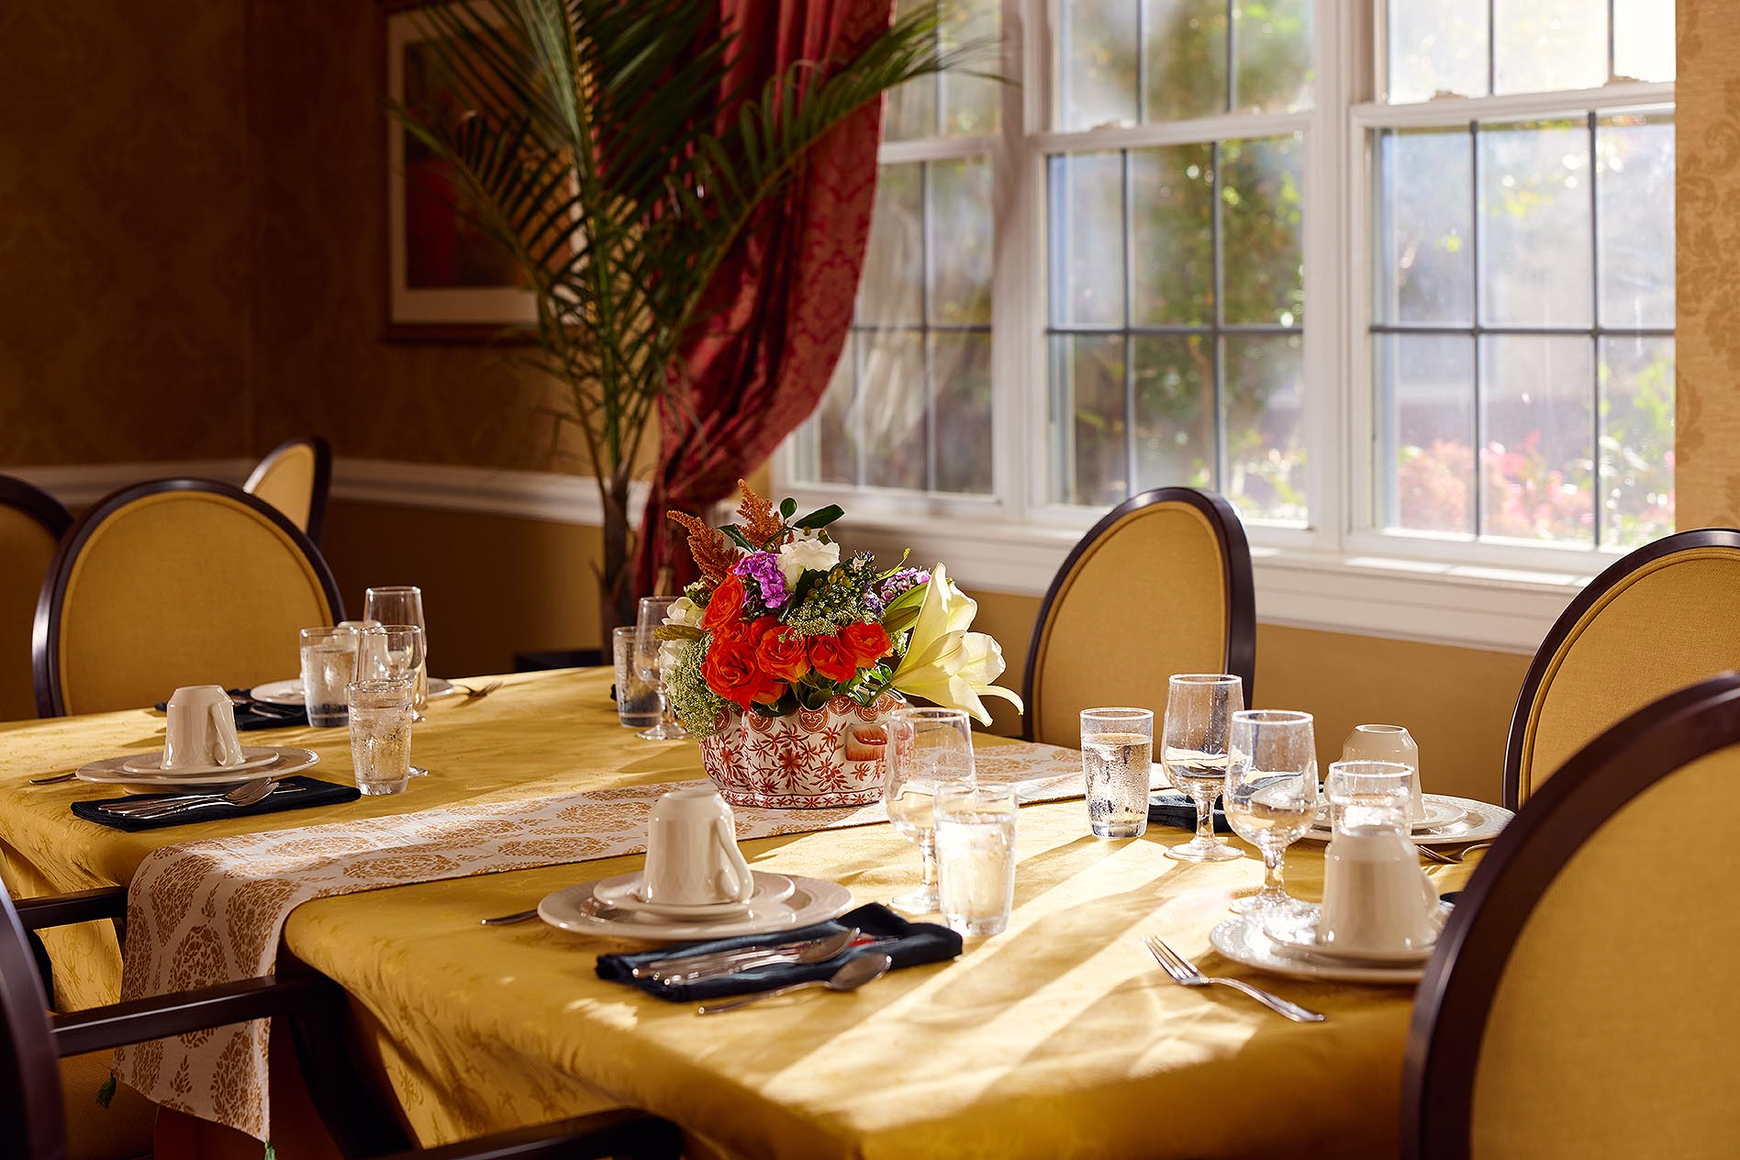 A sunny table in the dining room